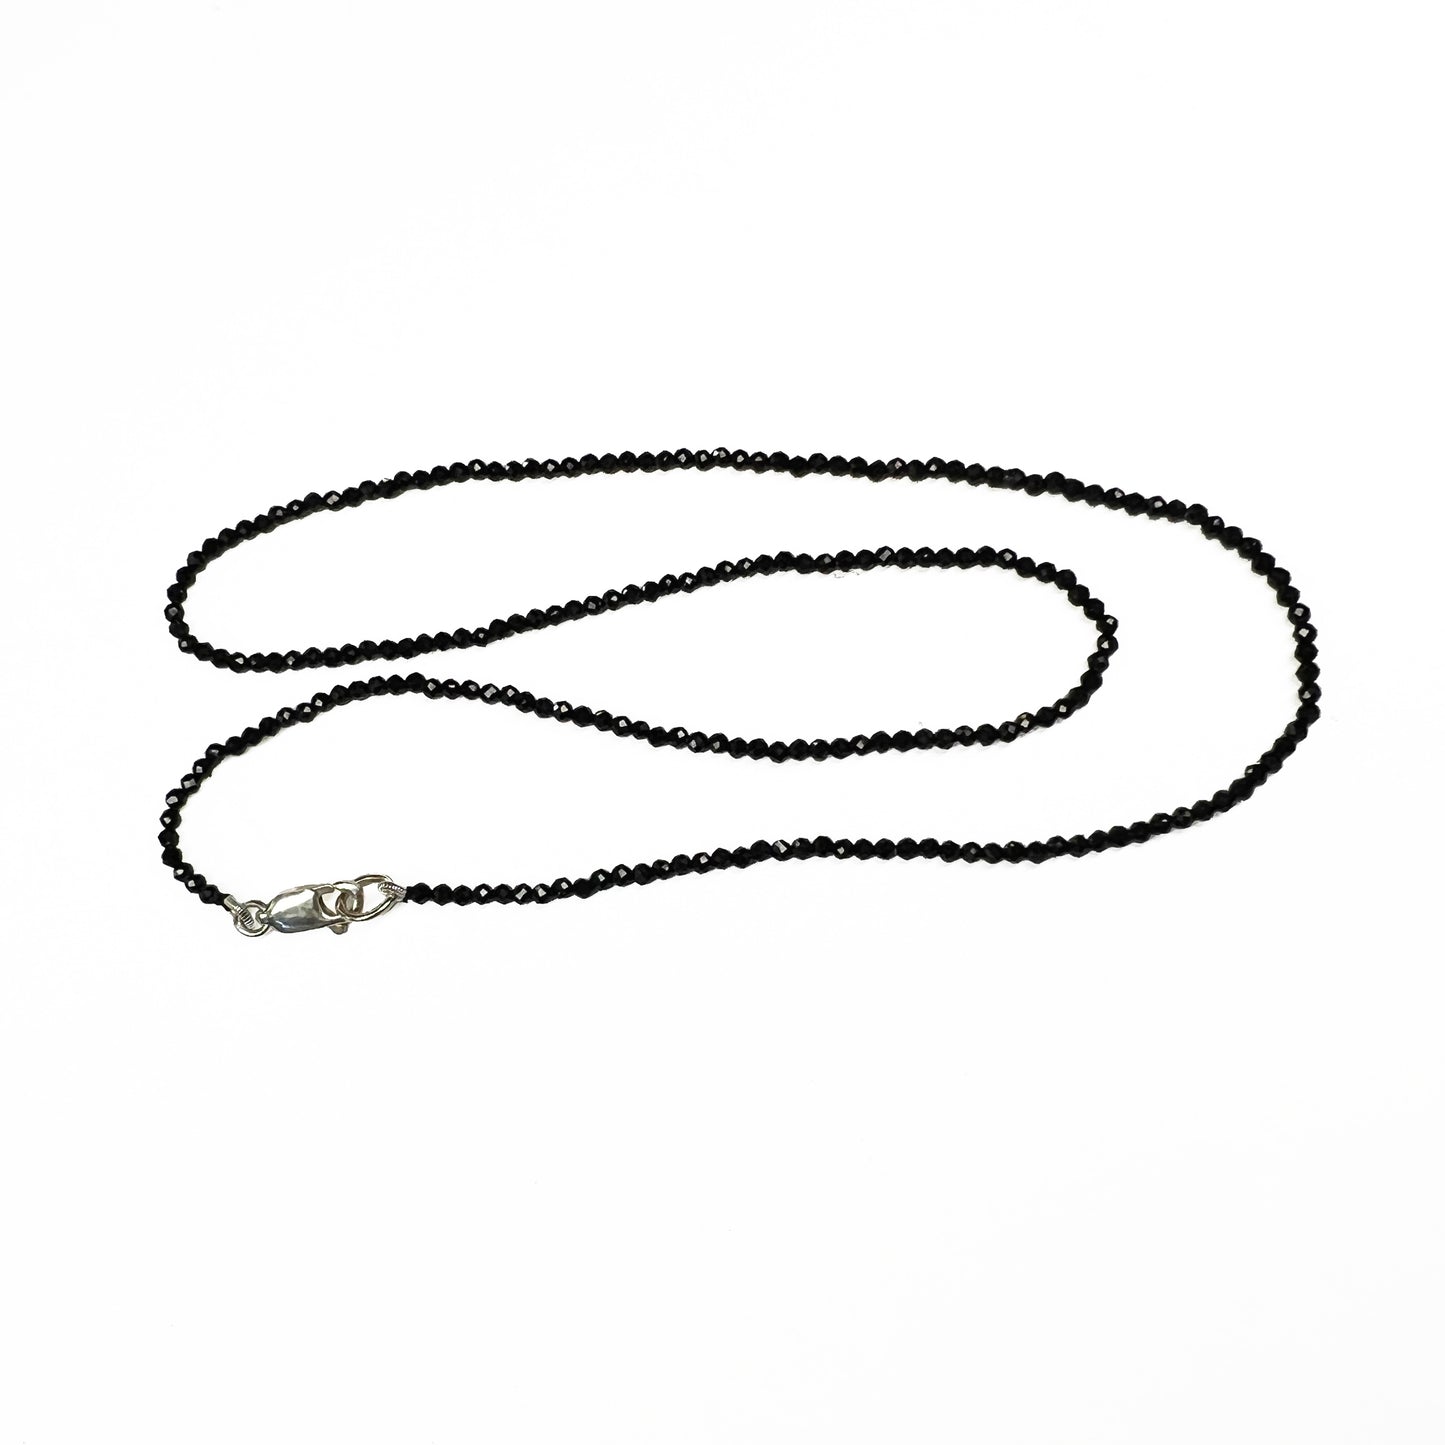 Black Spinel Necklace with Silver Clasp